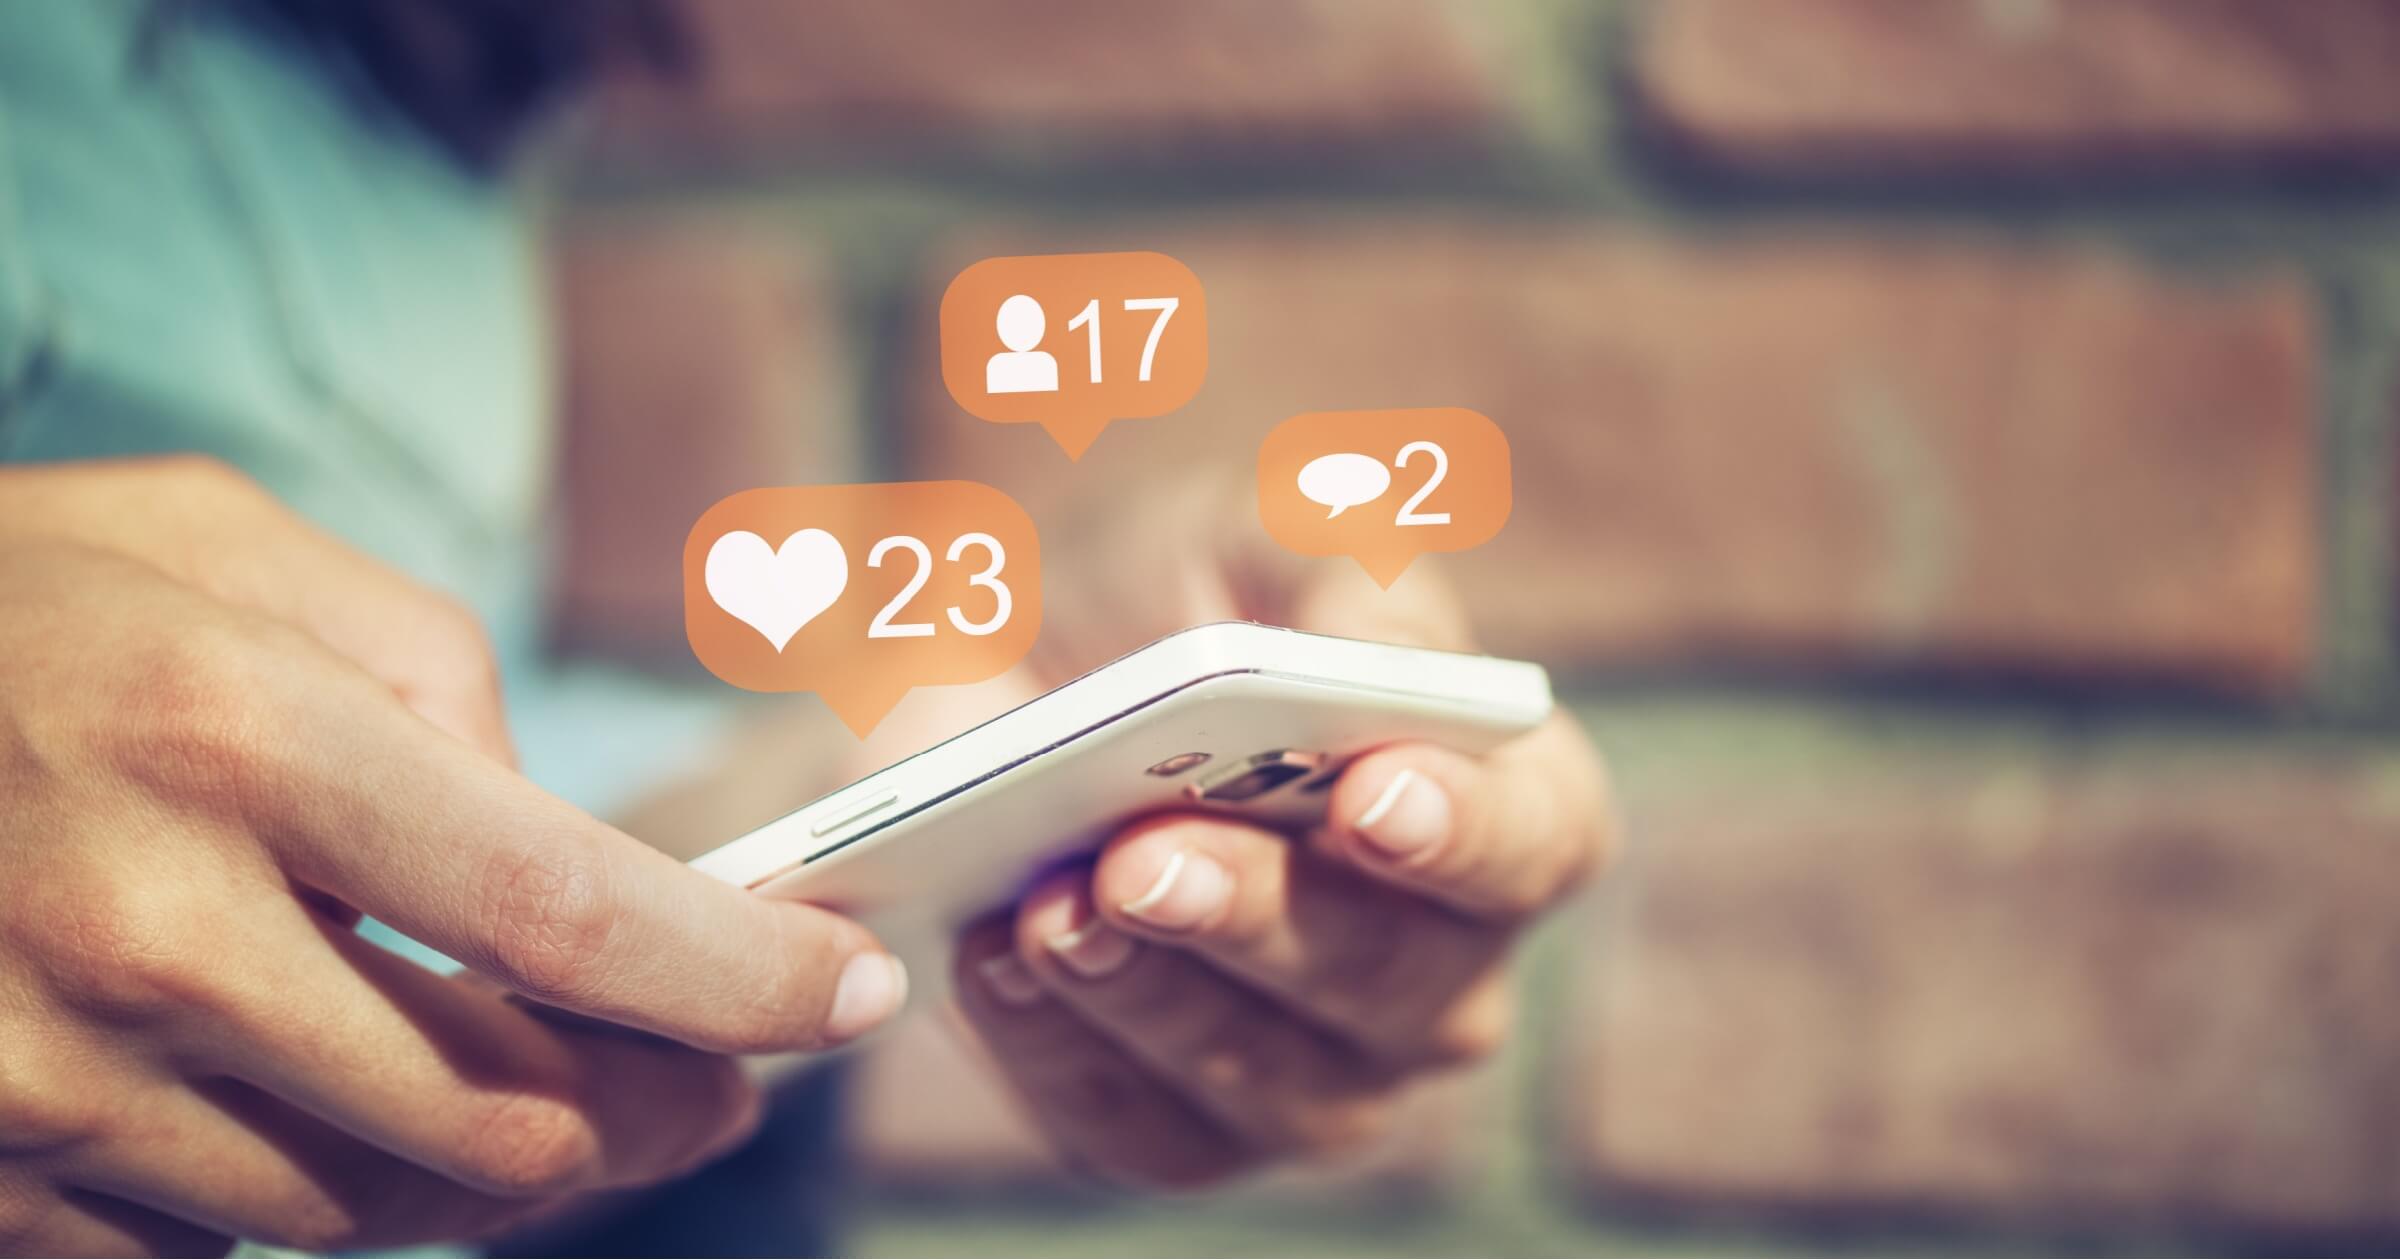 How to Post Testimonials on Instagram (3 Attention-Grabbing Formats)